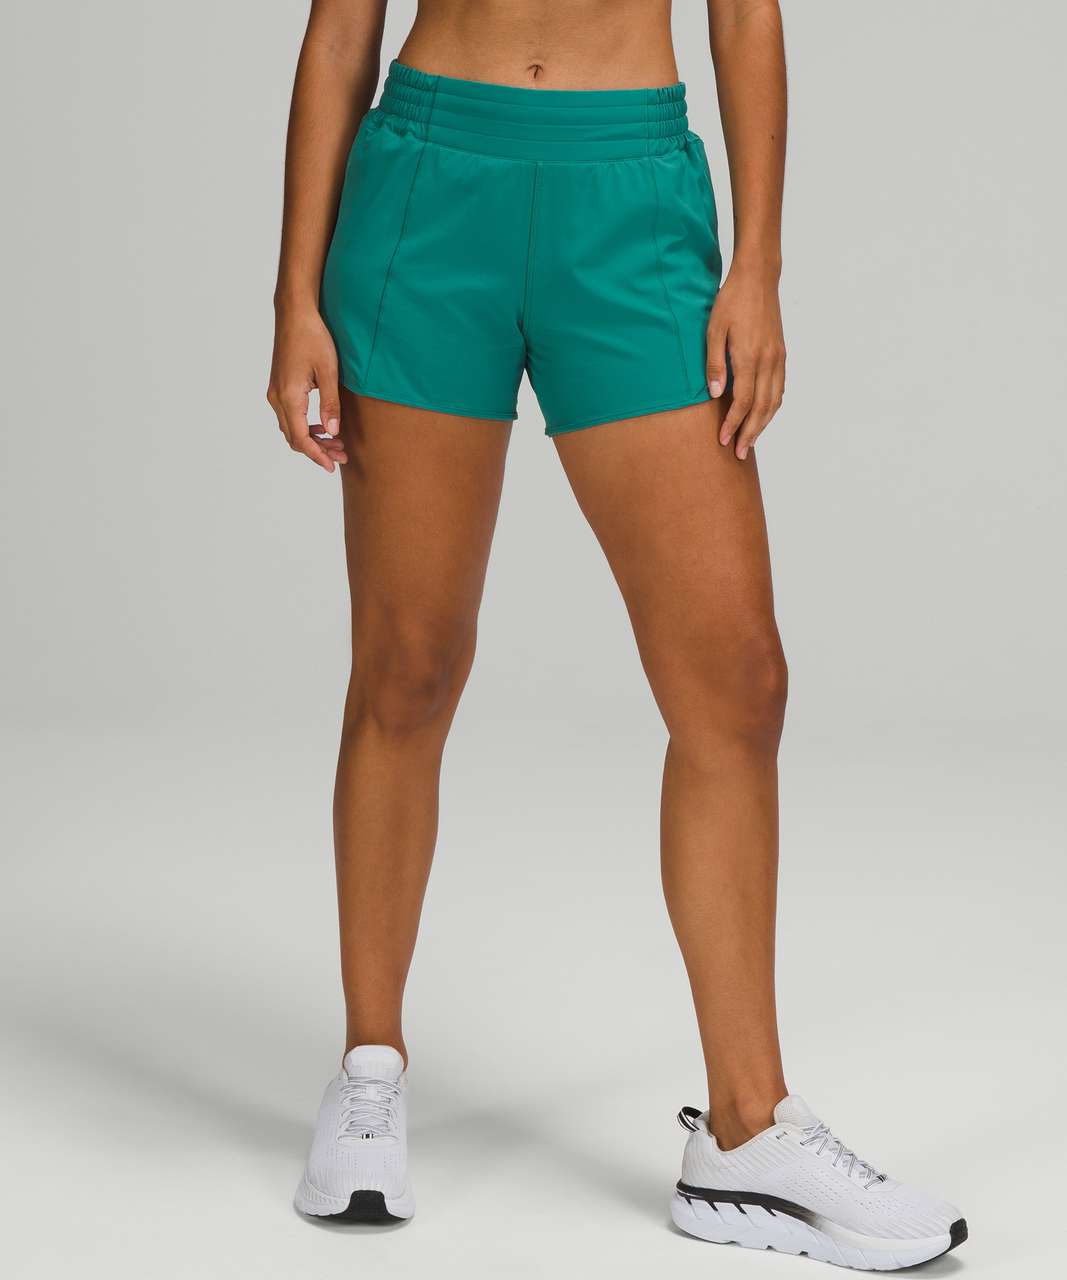 4K walk with Hotty Hot Low Rise Short 4” in Teal Lagoon (8) and Swiftly  Breathe Muscle Tank Top in Sonic Pink (6) : r/lululemon